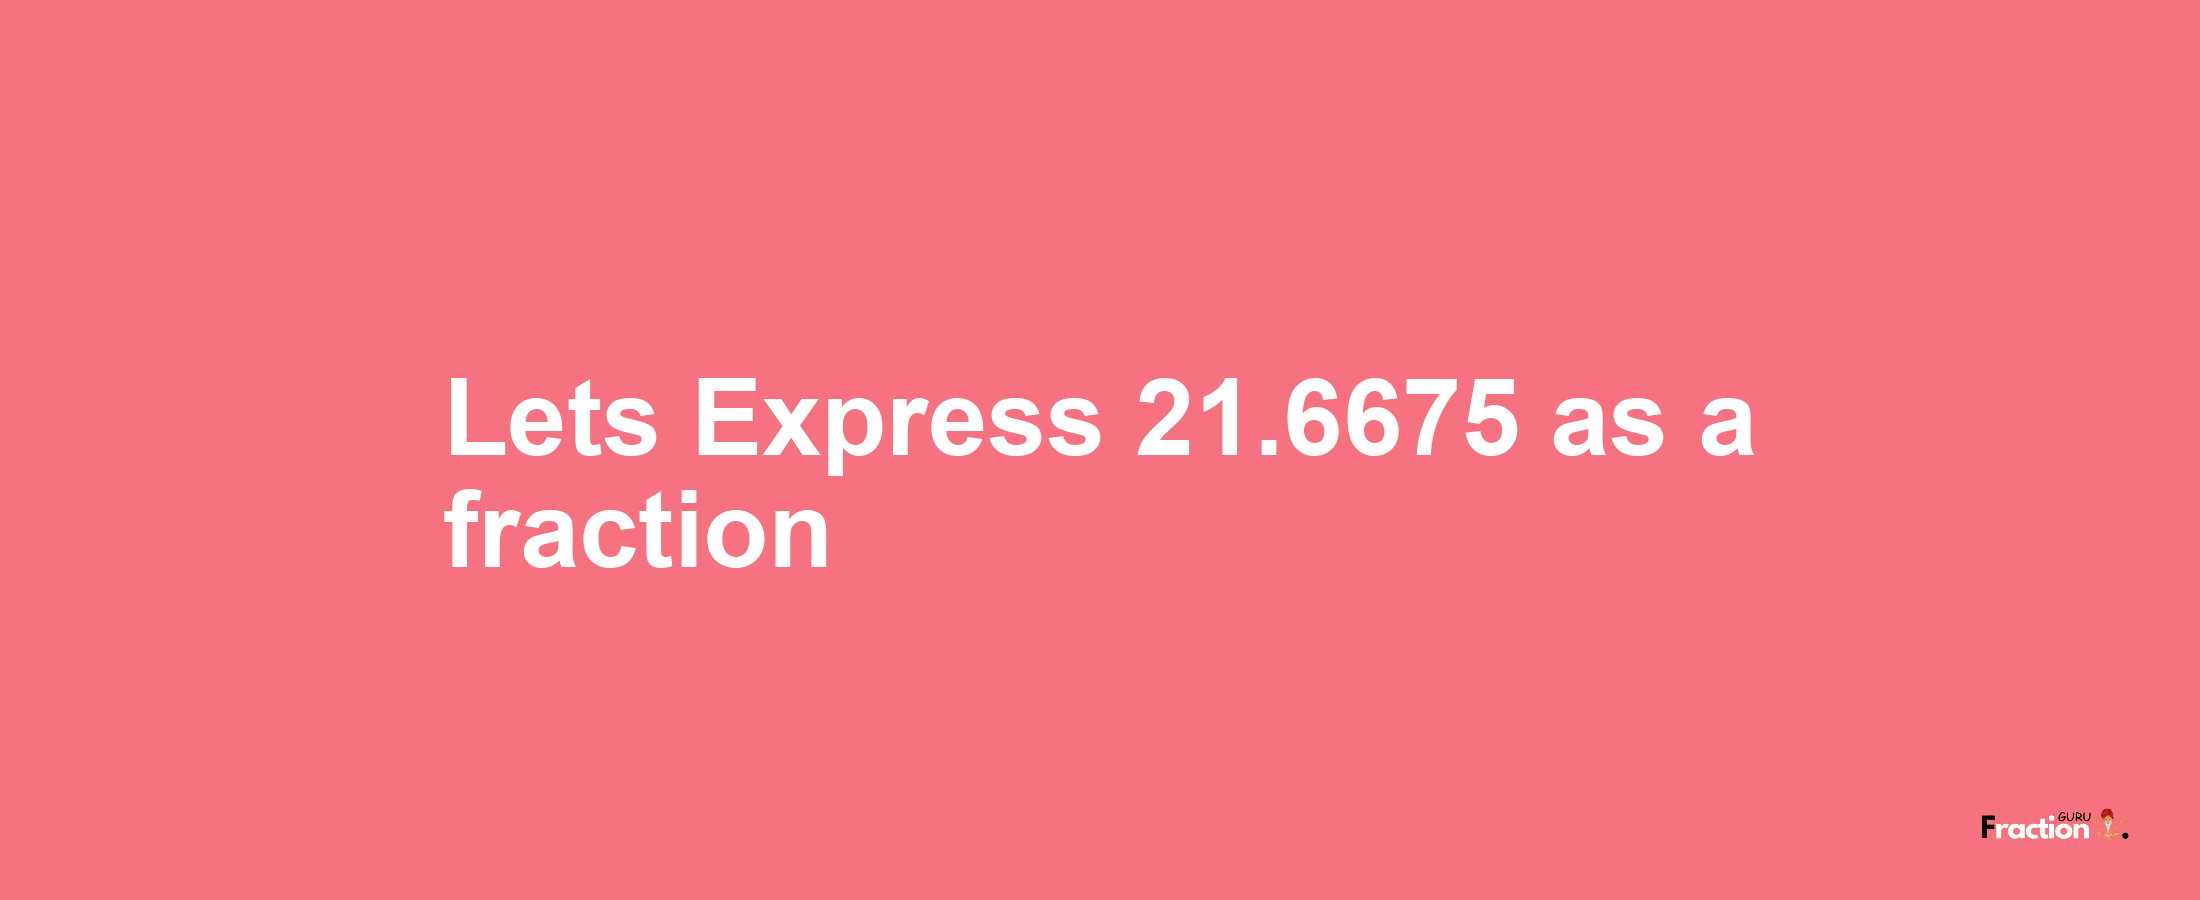 Lets Express 21.6675 as afraction